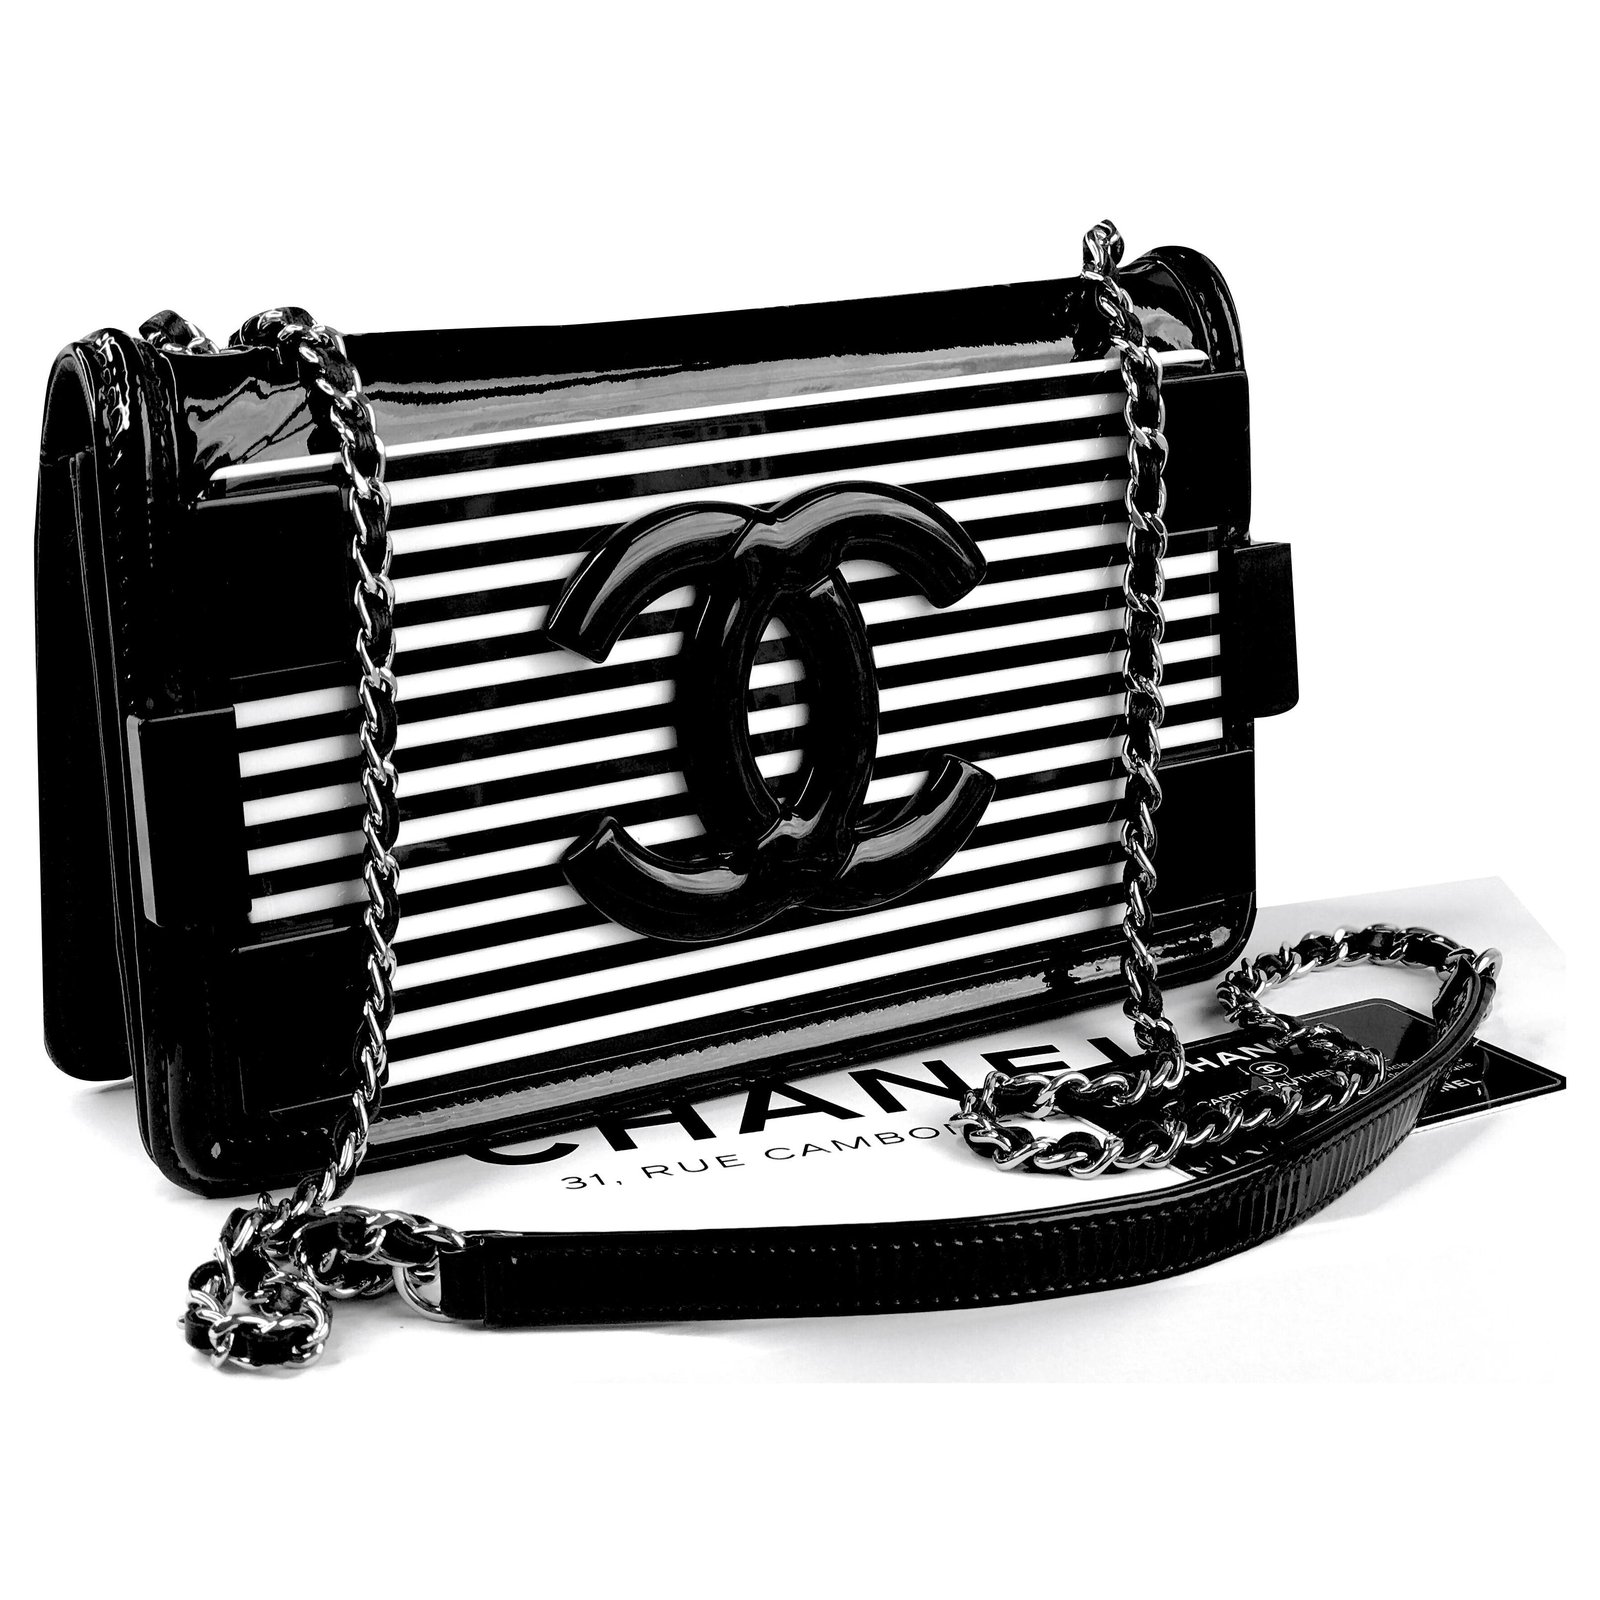 Chanel Famous Lego Collector's Bag Black White Leather Patent